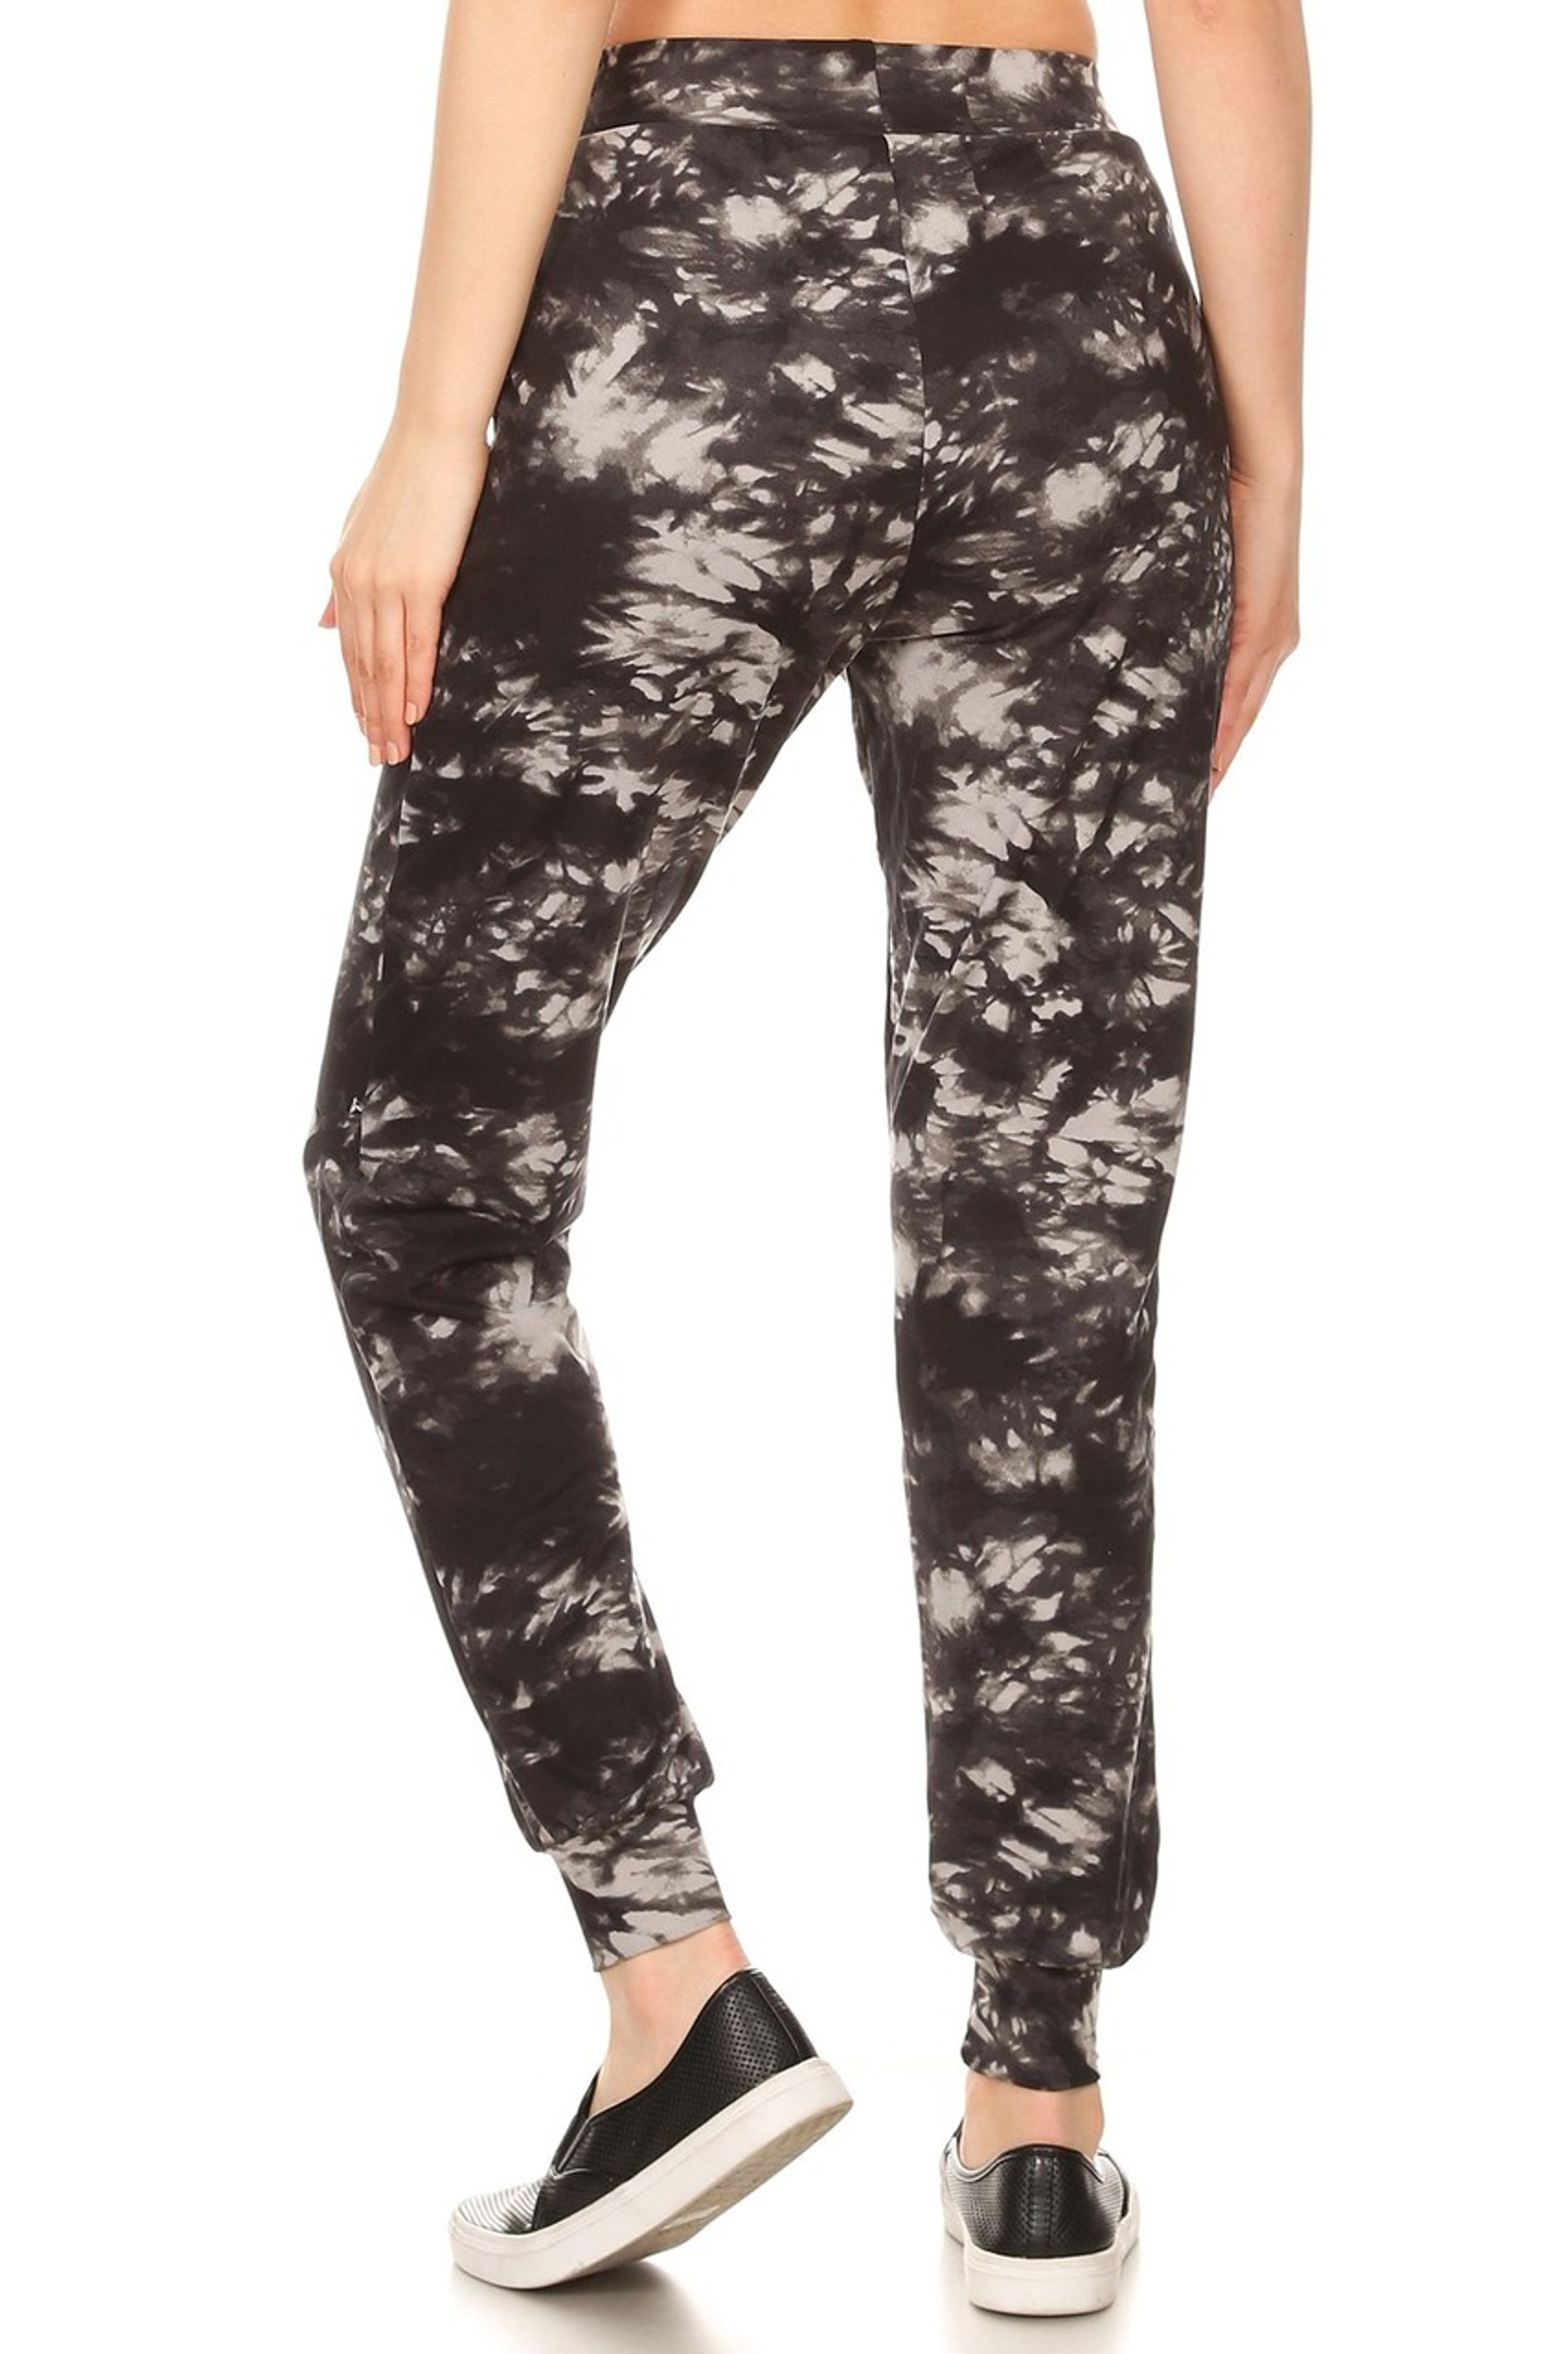 Brushed Black and Gray Tie Dye Joggers